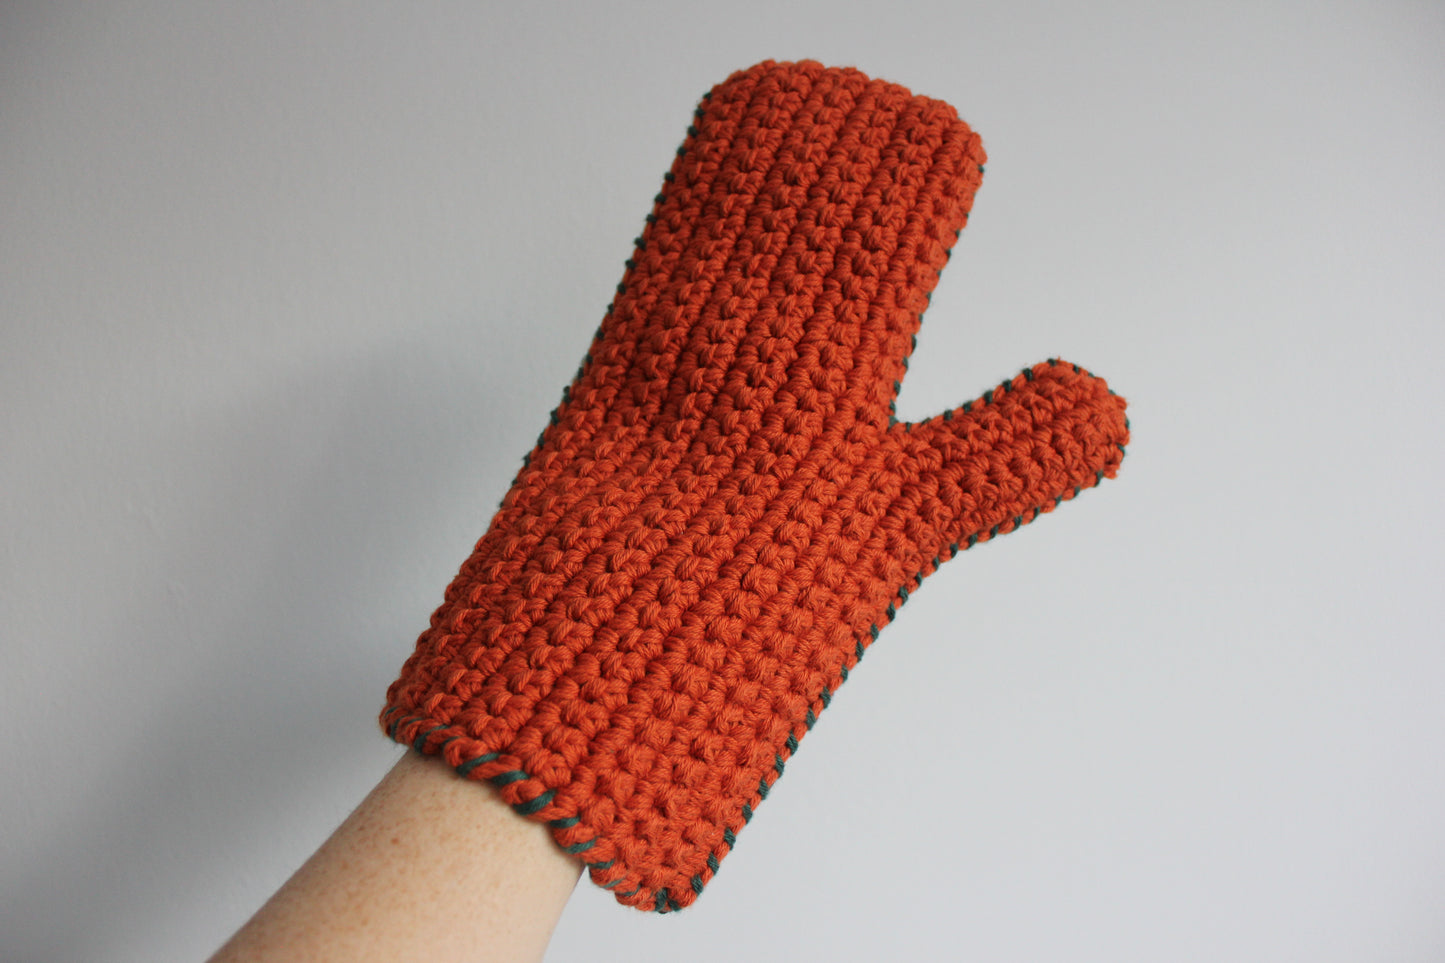 The Oven Mitts Pattern